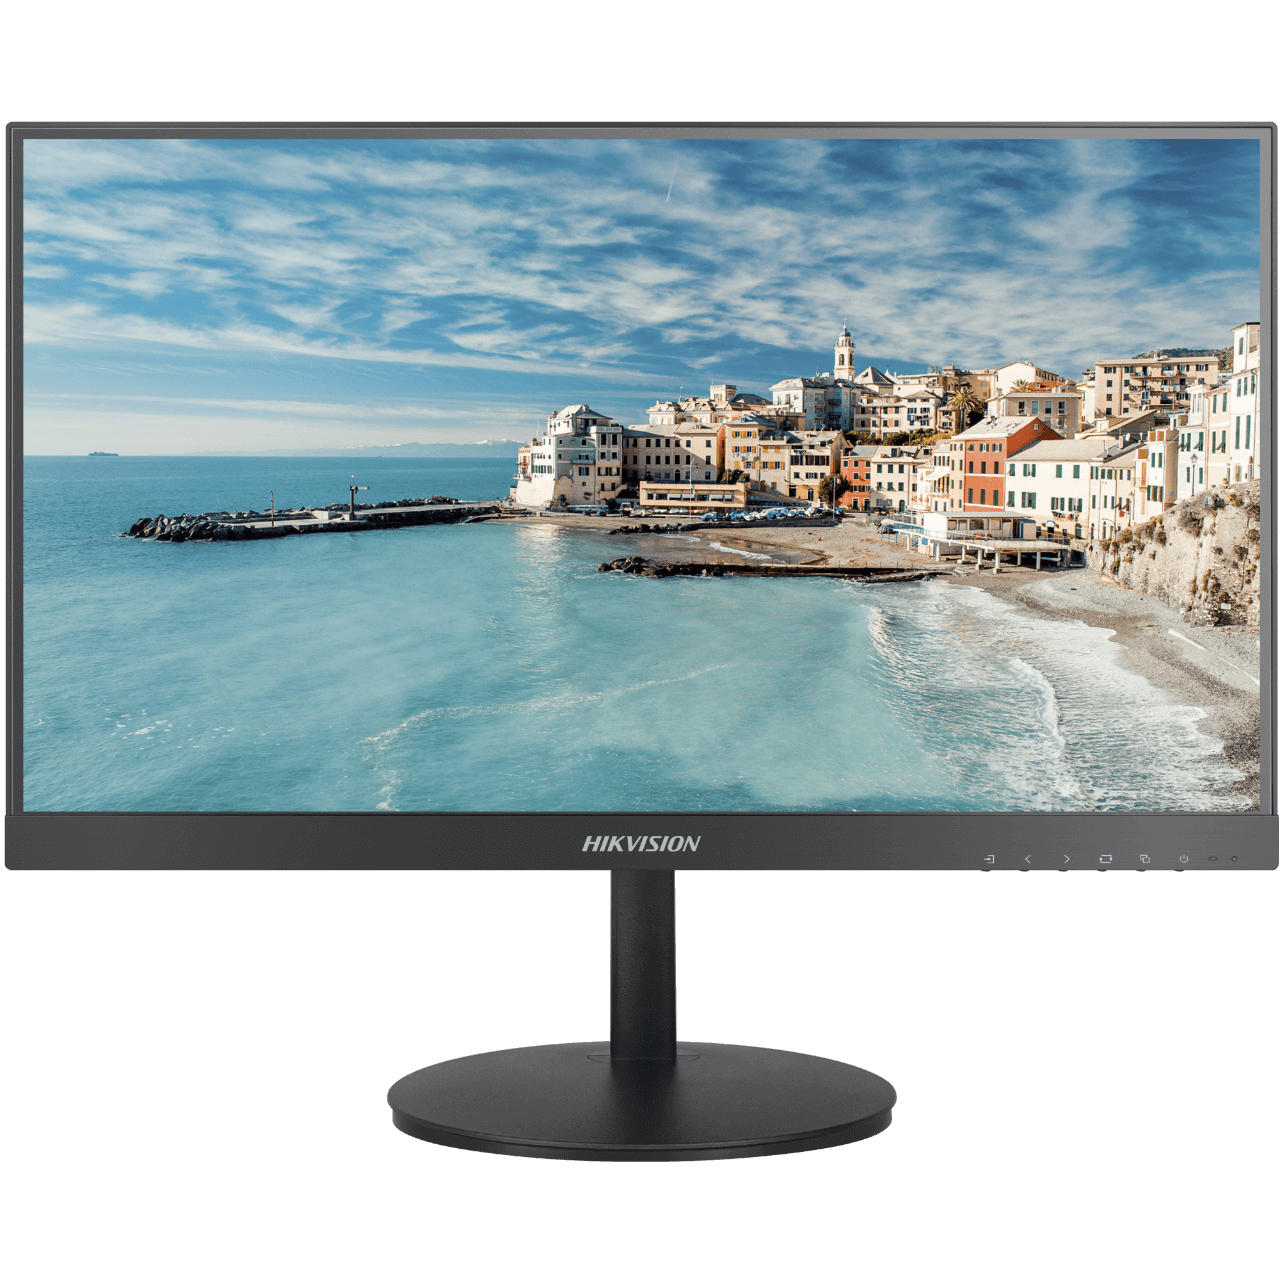 Hikvision Ultra-thin border for 3 sides 22 inch FHD Display Monitor